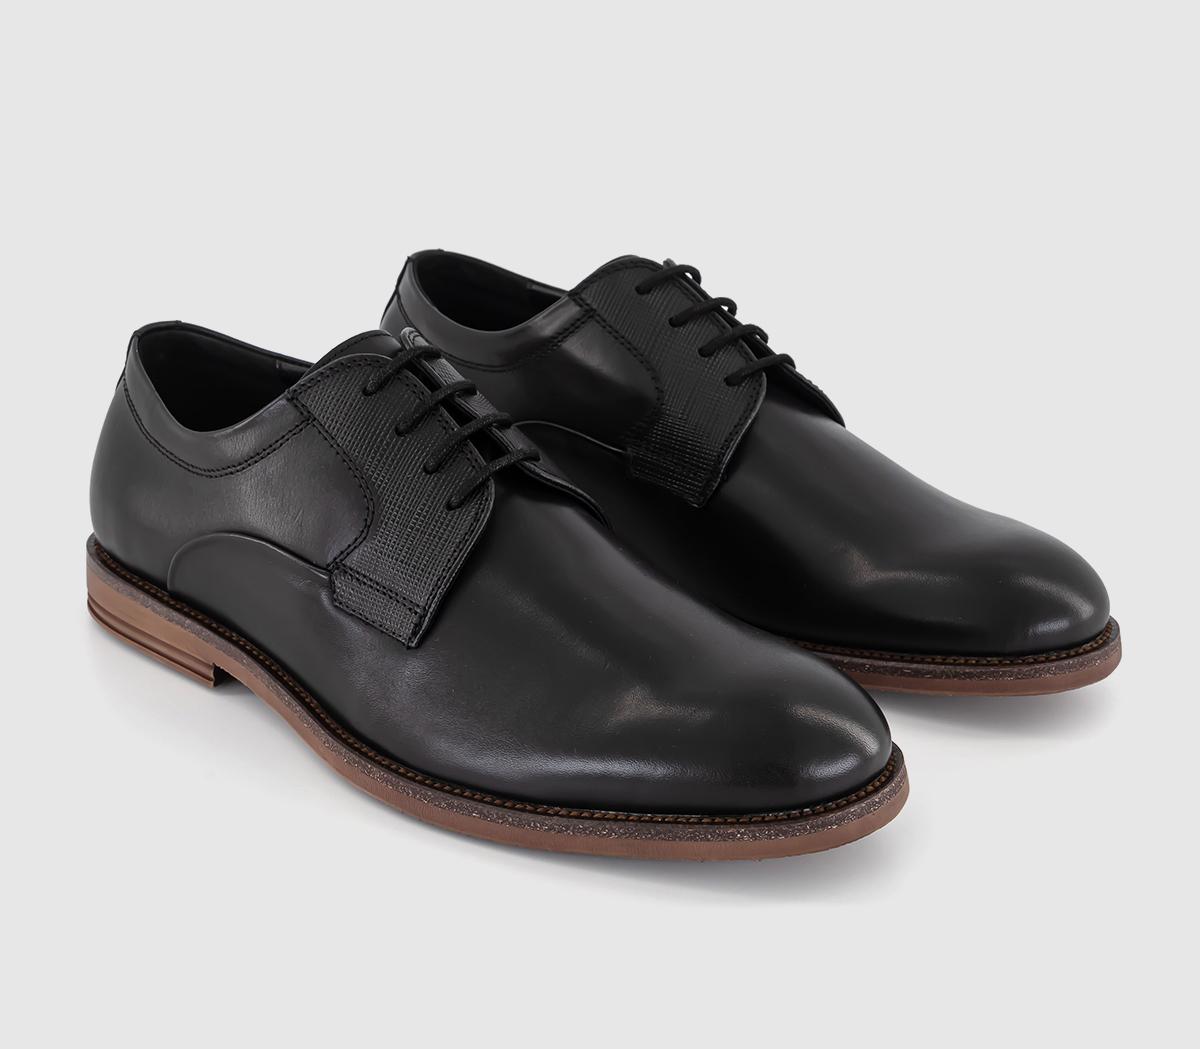 OFFICE Matteo Embossed Flexi Sole Derby Shoes Black Leather - Derby Shoes